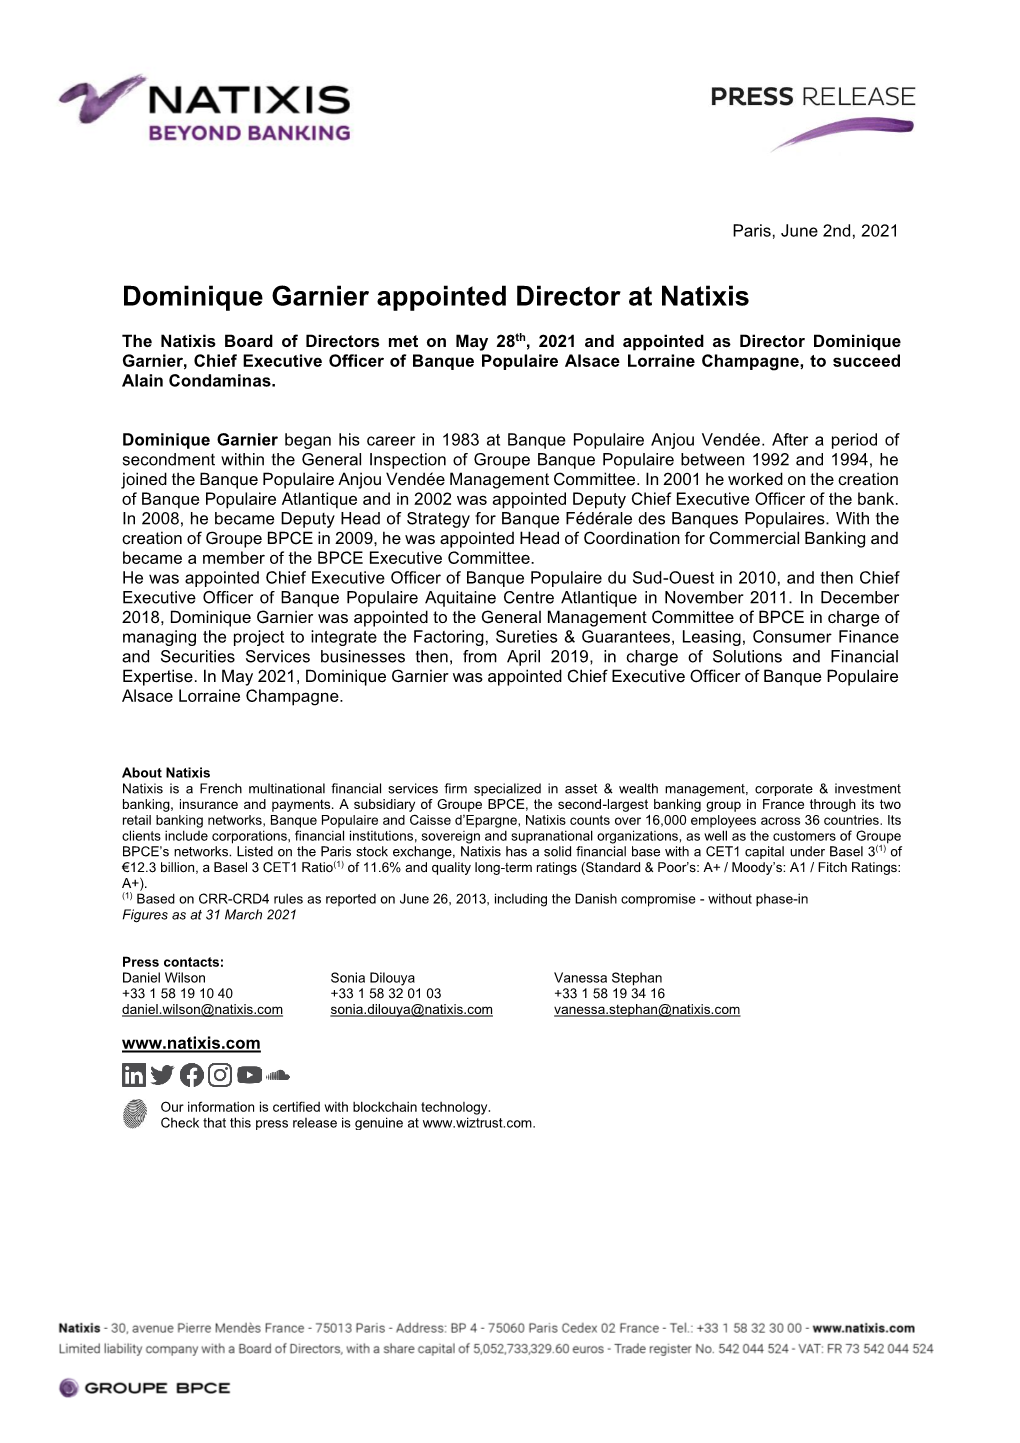 Dominique Garnier Appointed Director at Natixis